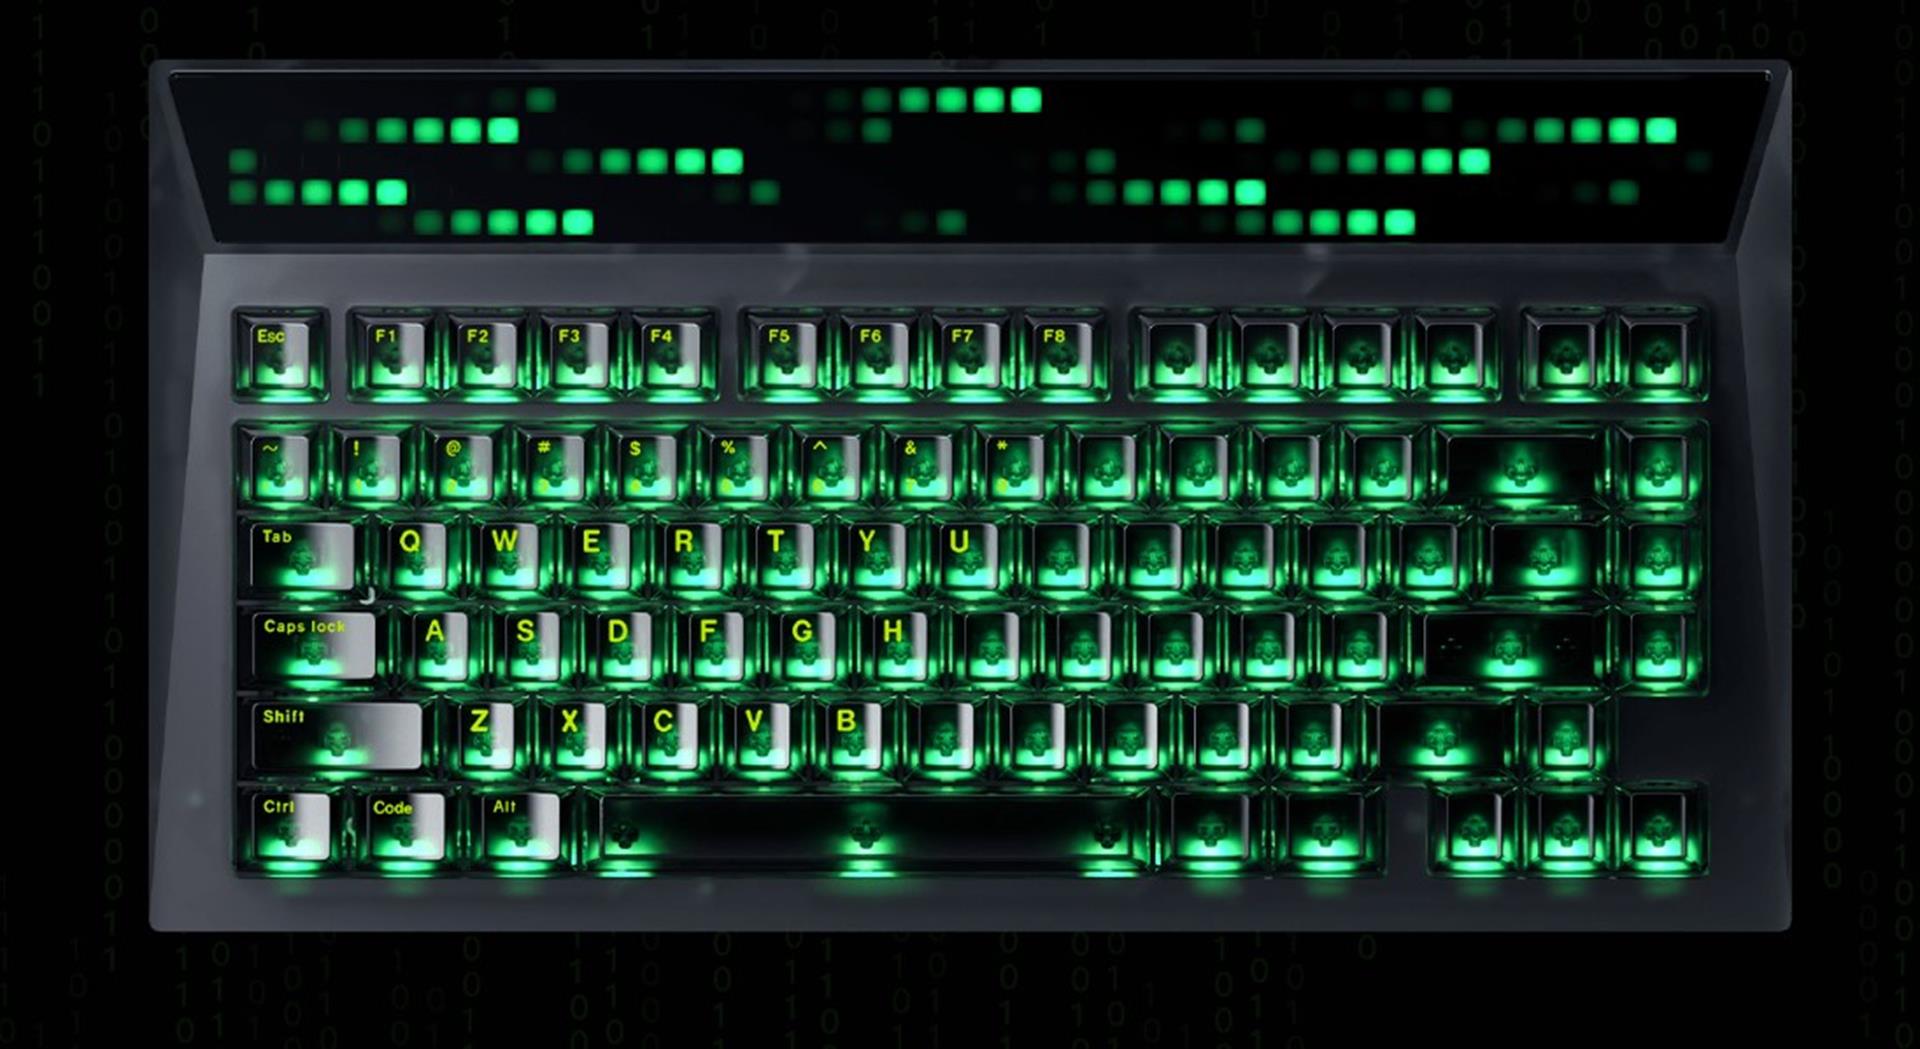 The Cyberboard Terminal keyboard will make you feel like a hacker ... but it comes at a price